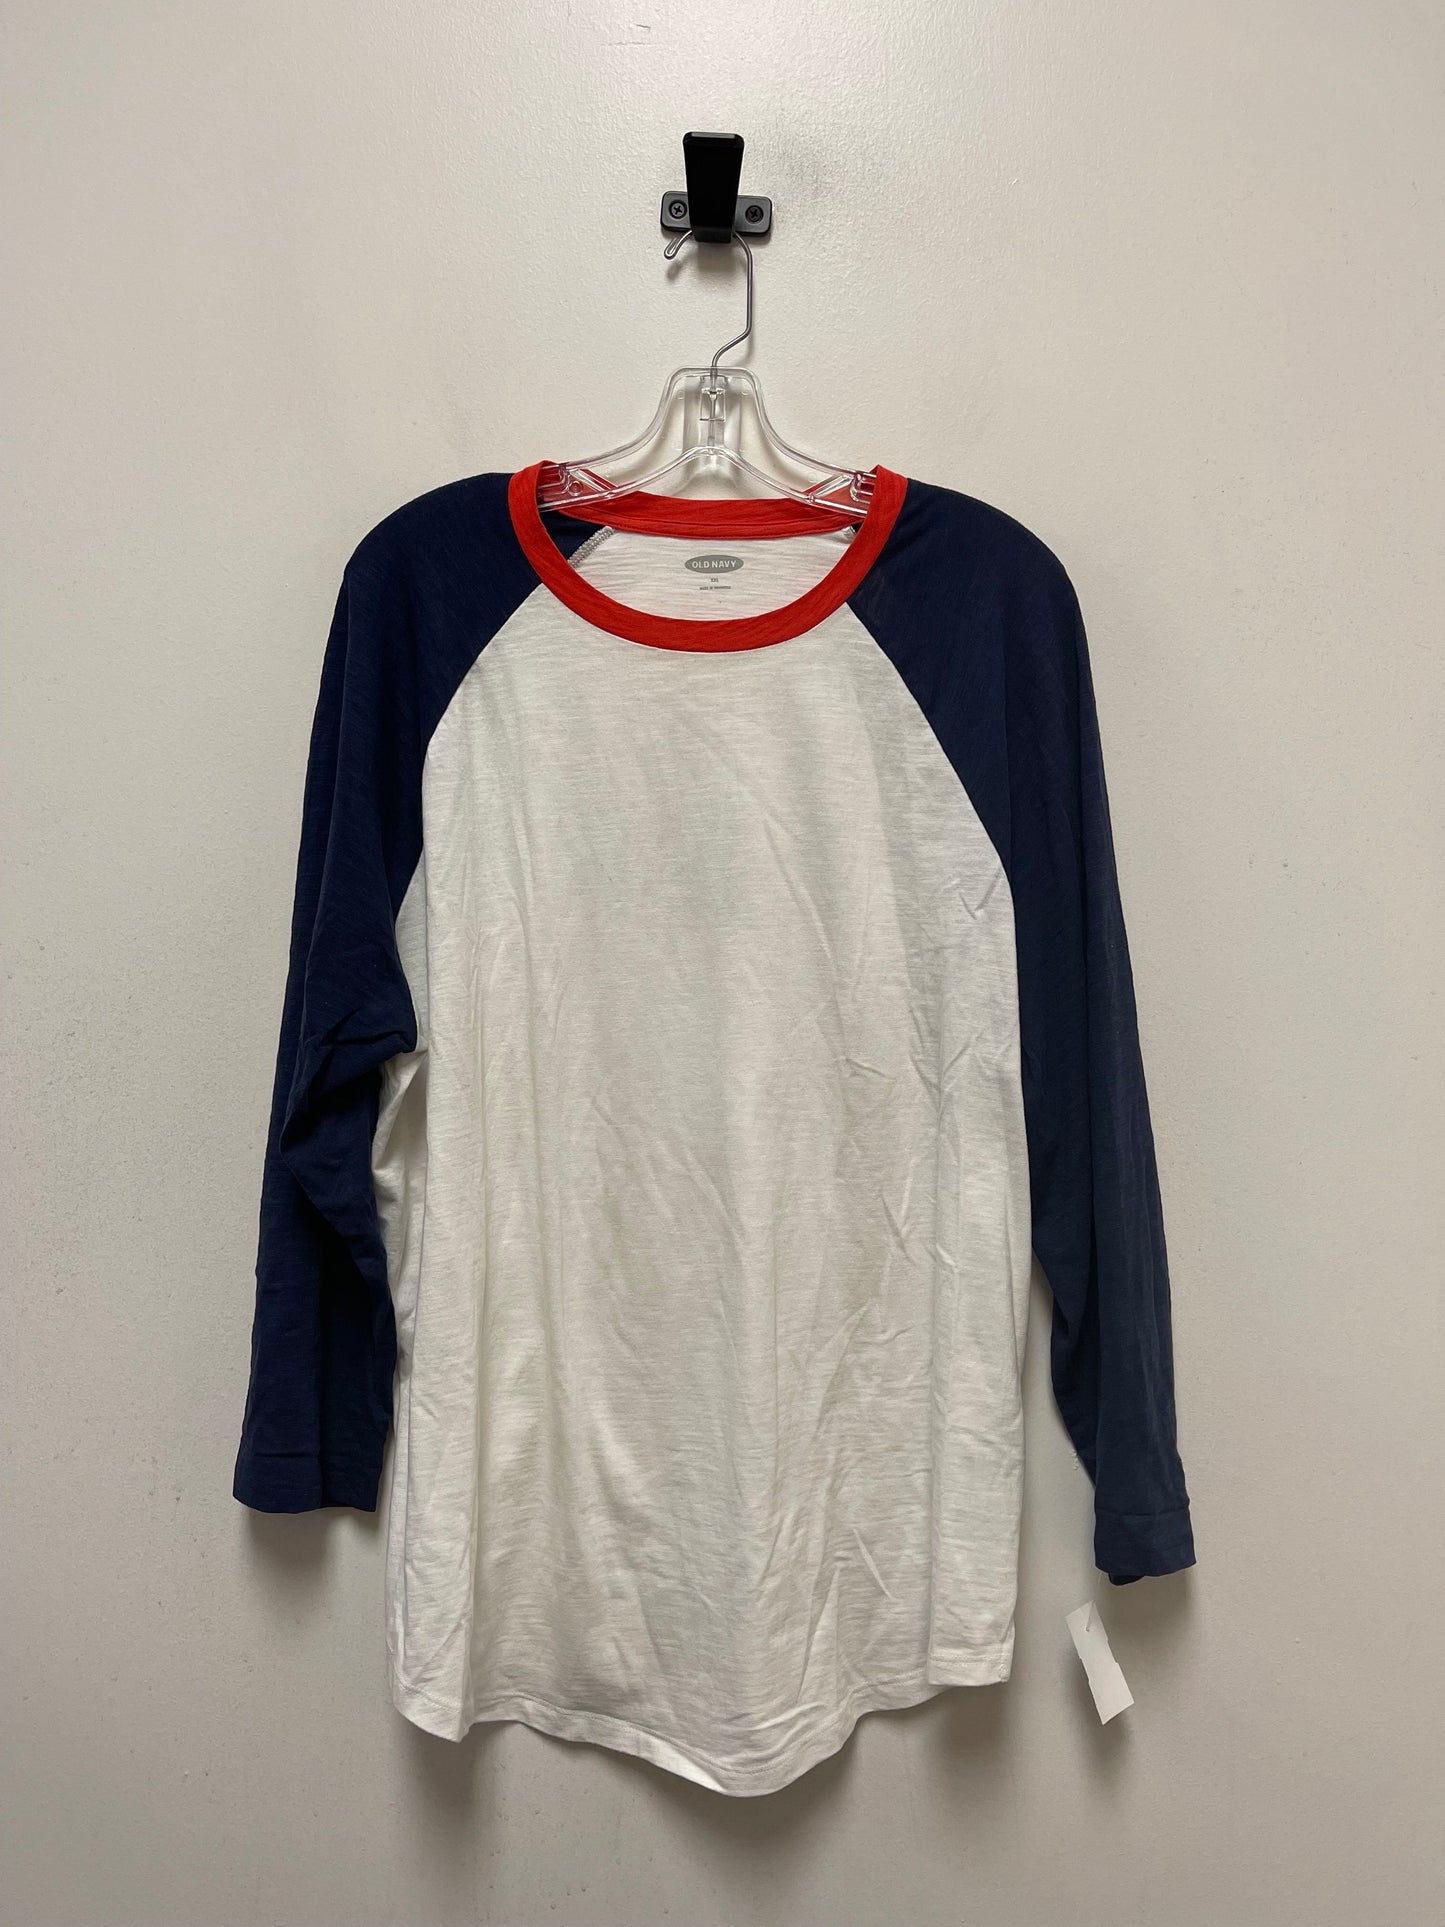 Blue Red & White Top Long Sleeve Old Navy, Size 2x